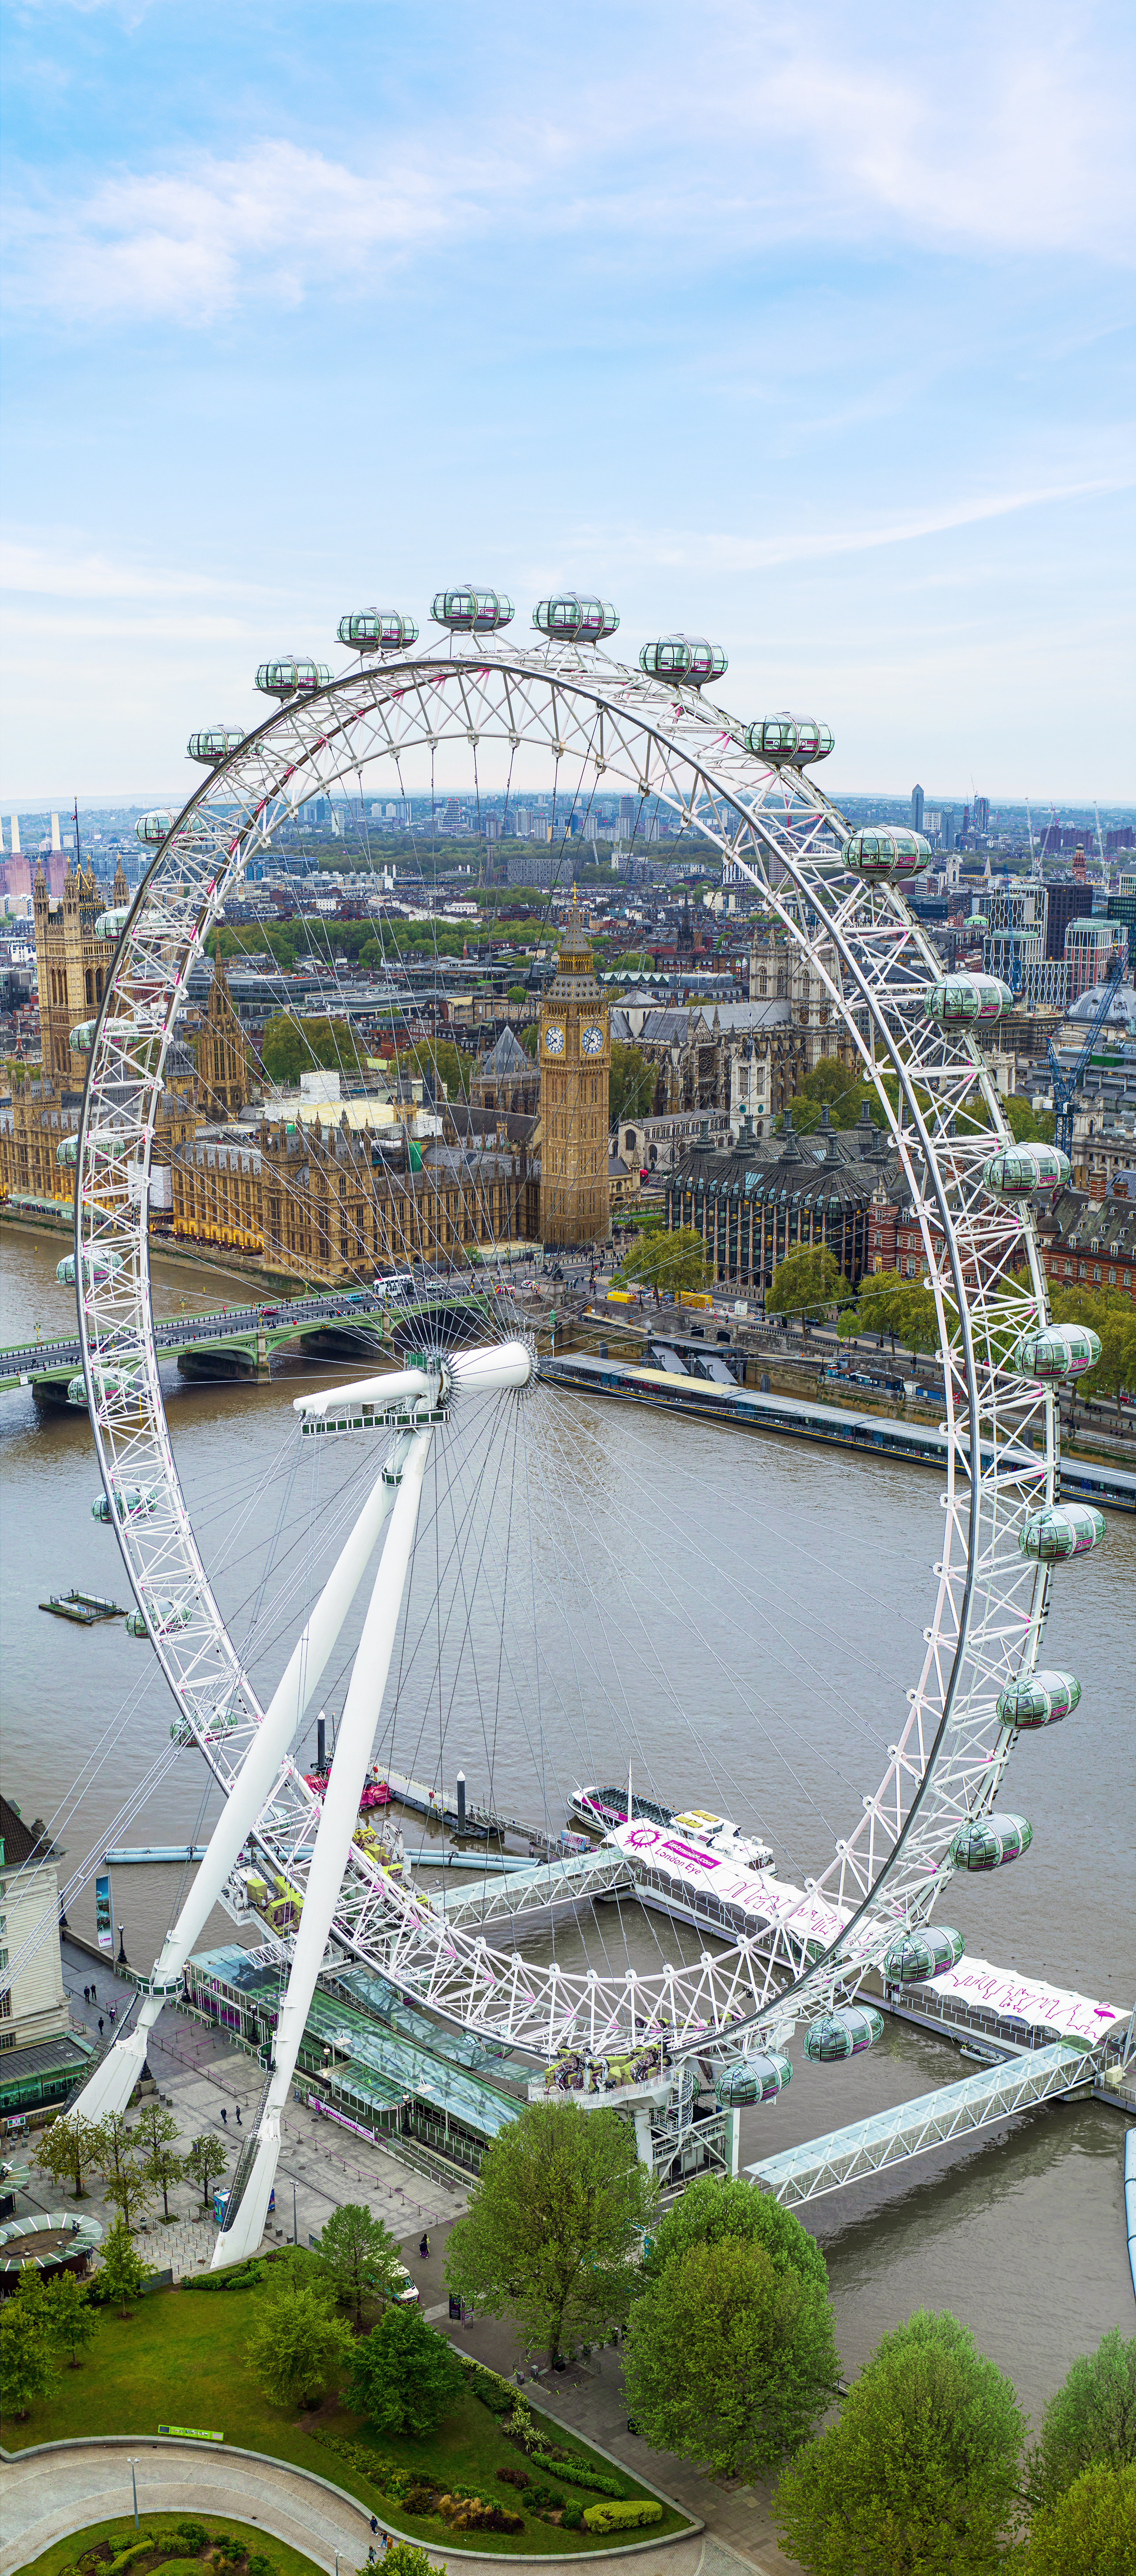 The Official London Eye